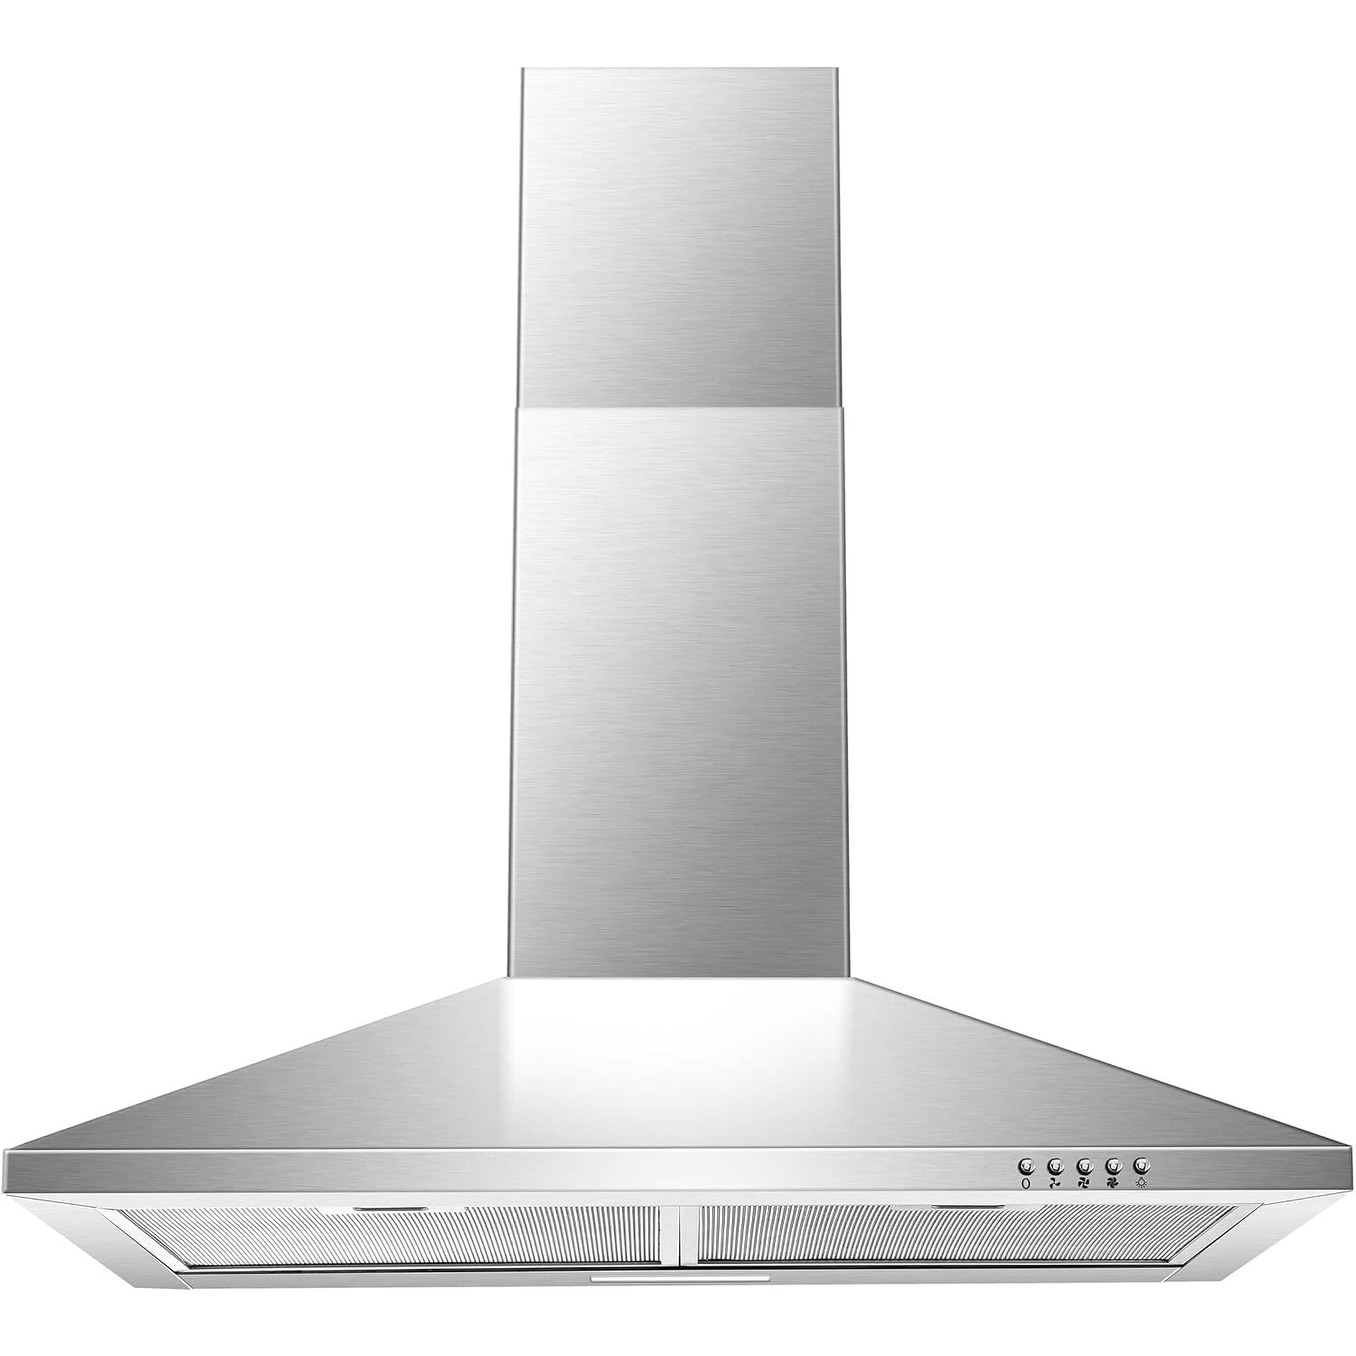 30 inch Wall Mount Range Hood in Stainless Steel Stove Vent Hood with Aluminum Filters 3 Speed Exhaust Fan Button Control - Black